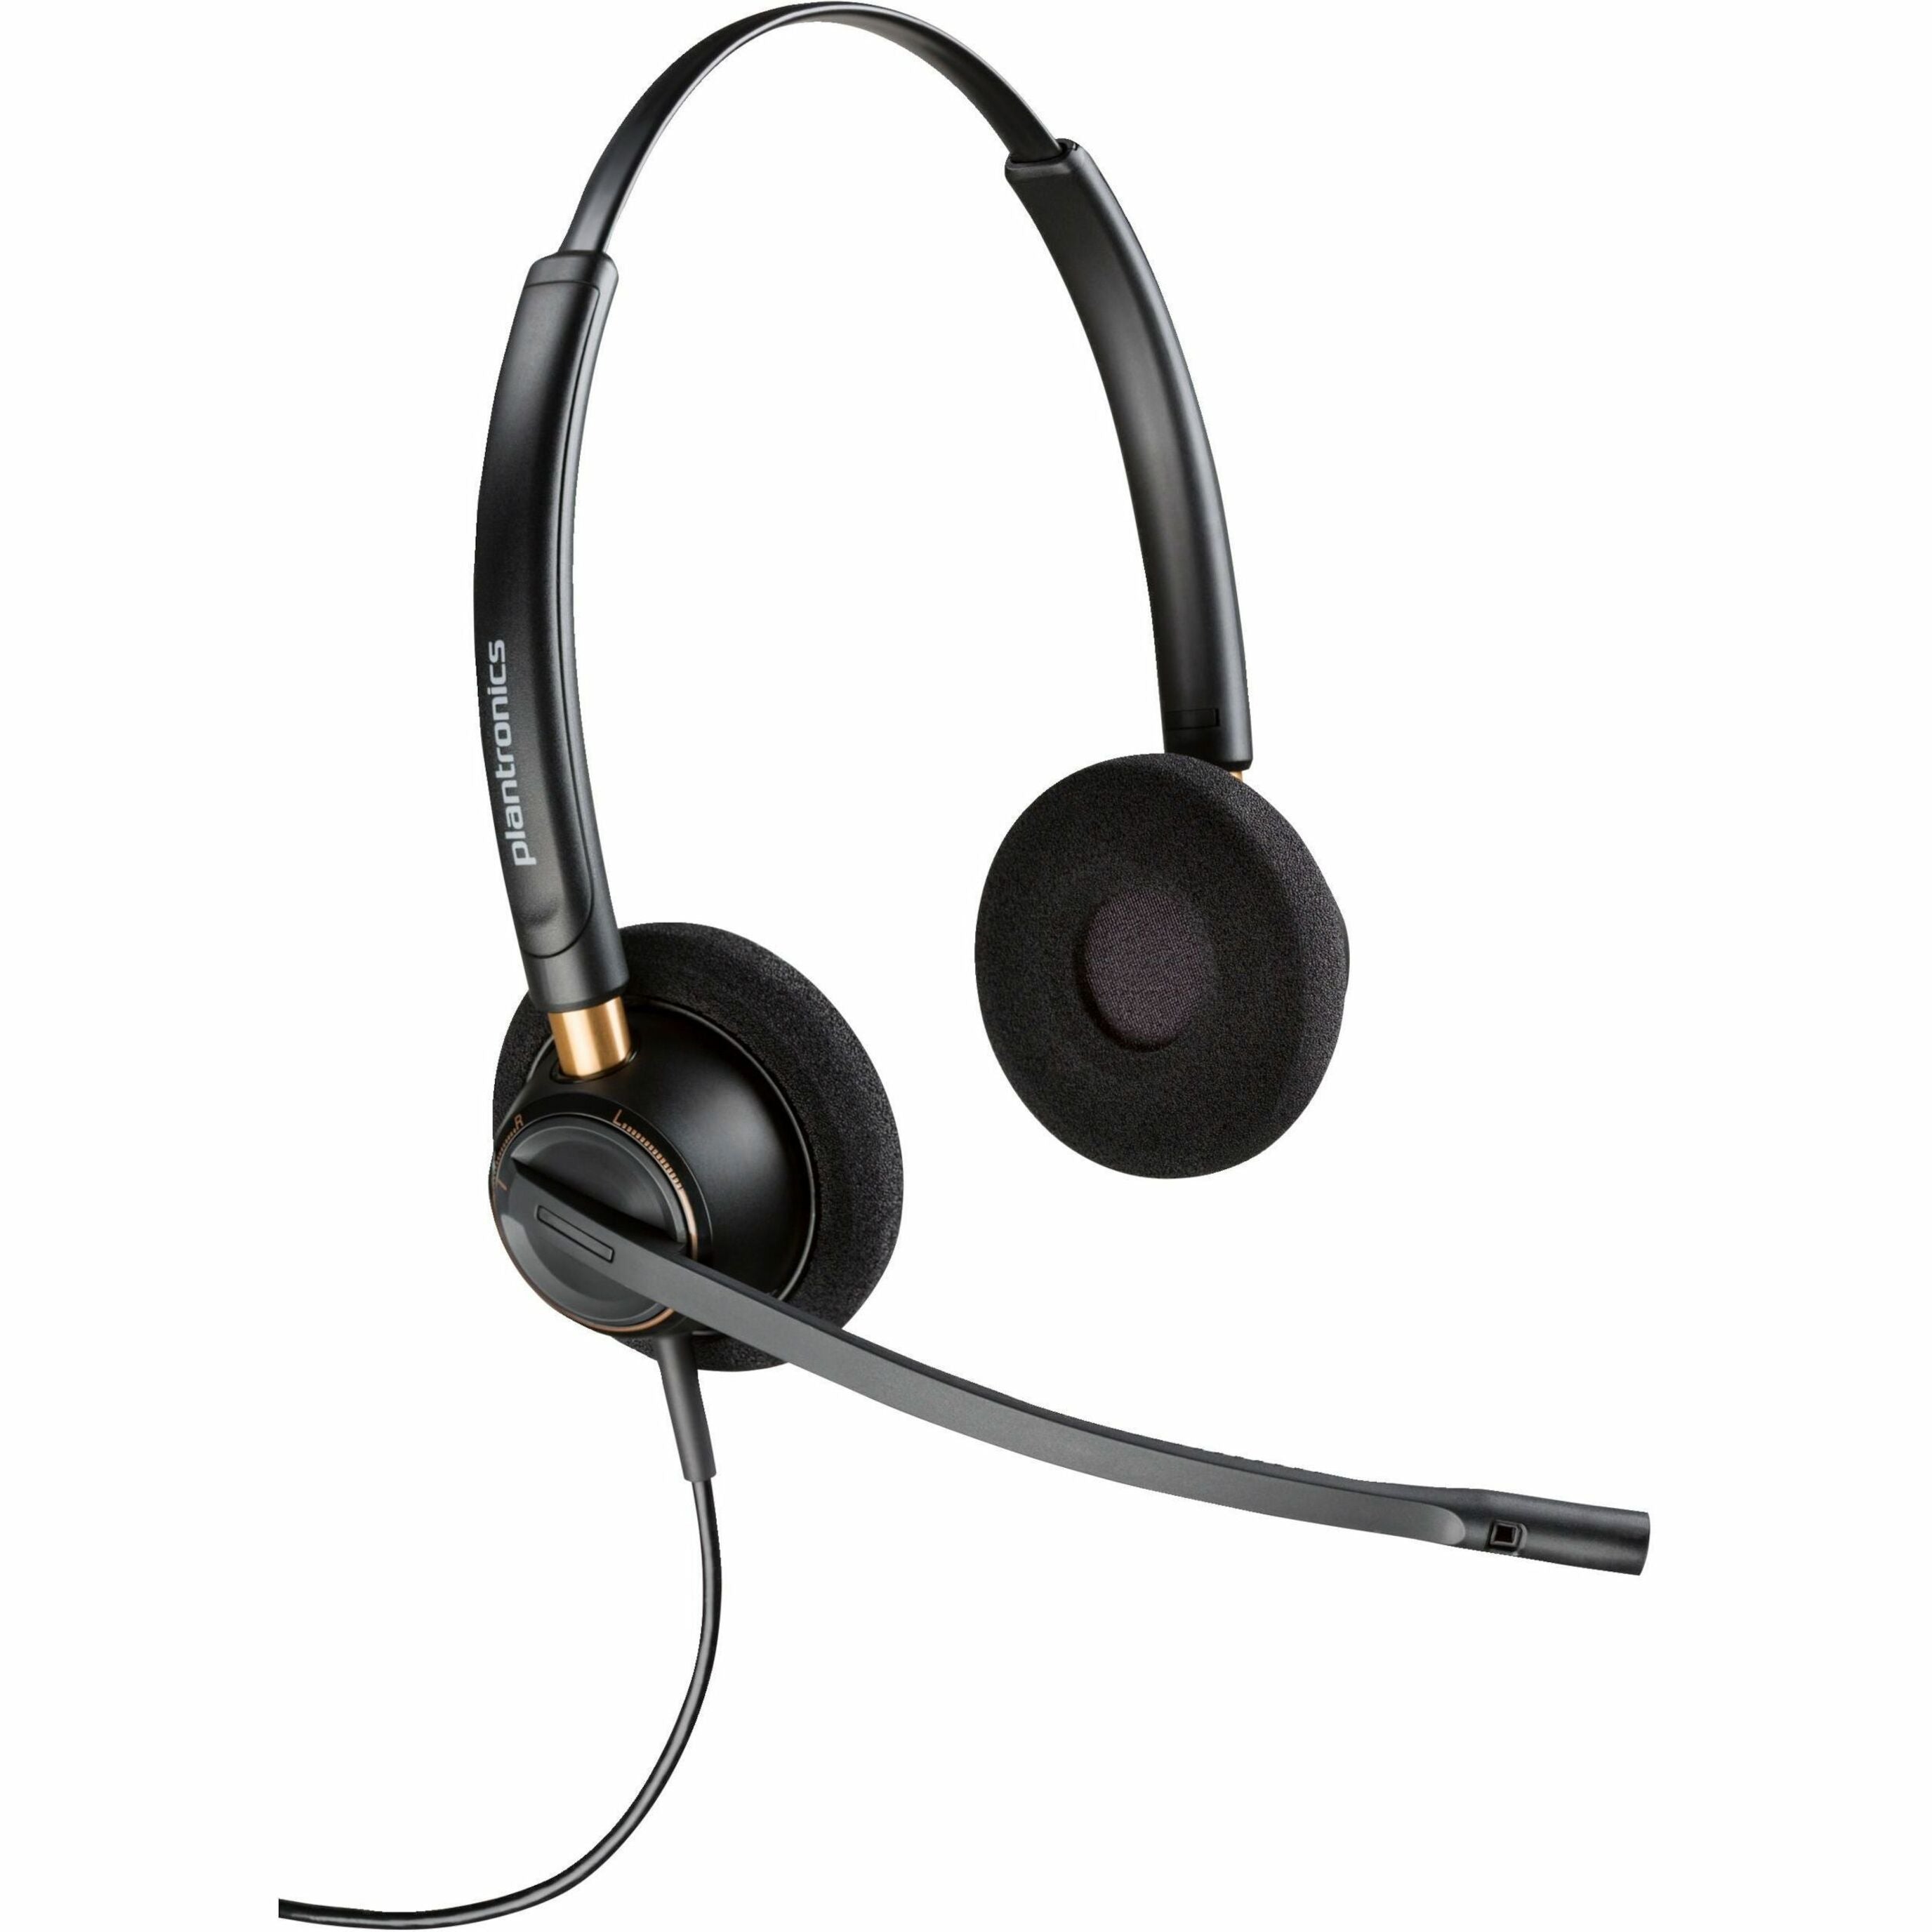 Poly 783P5AA EncorePro HW520D Headset, Binaural On-ear Stereo Headset with Noise Cancelling Microphone